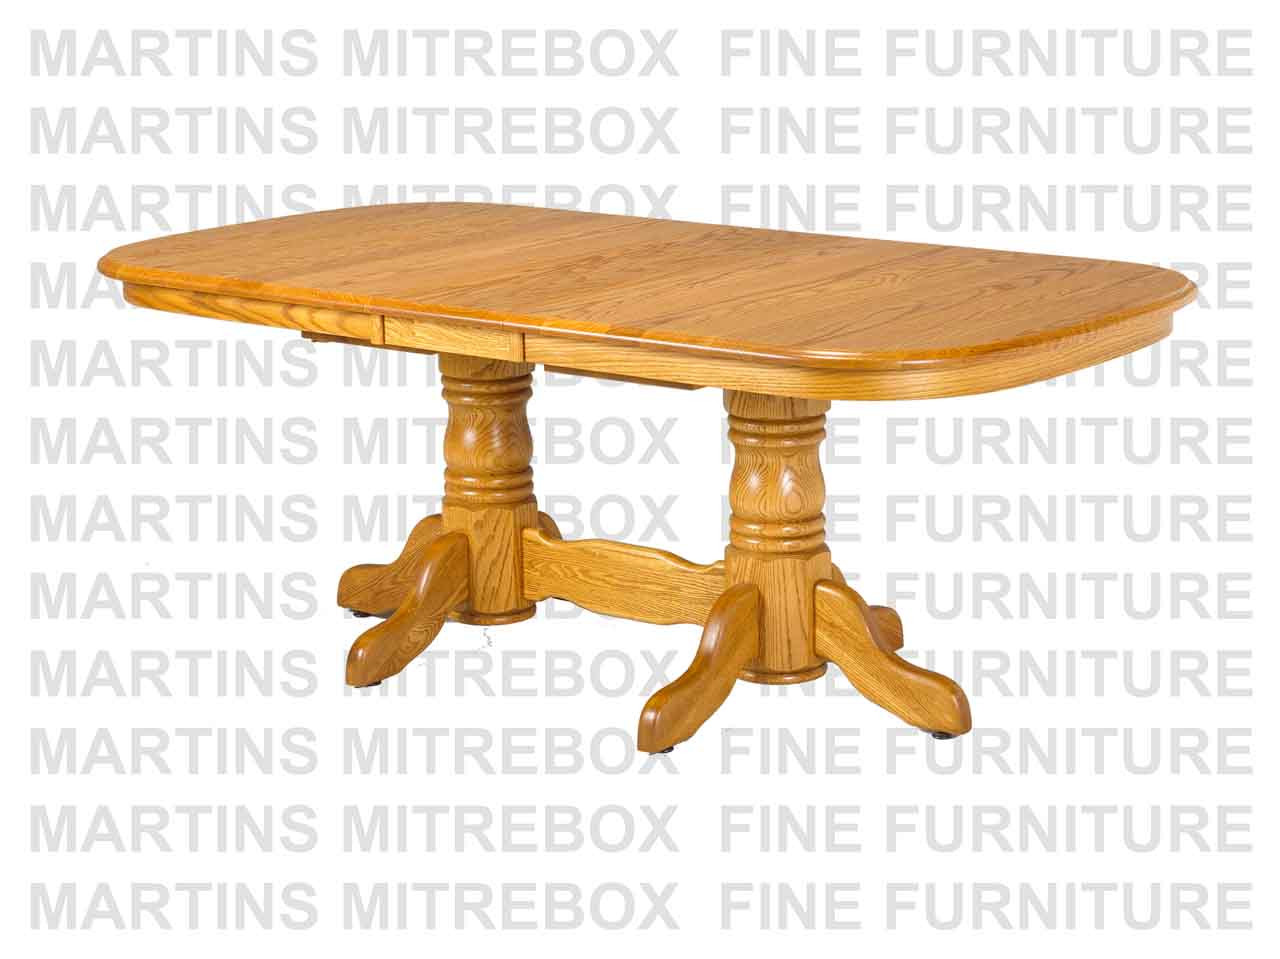 Oak Martin Collection Double Pedestal Table 42''D x 84''W x 30''H. Table Has 1.25'' Thick Top.